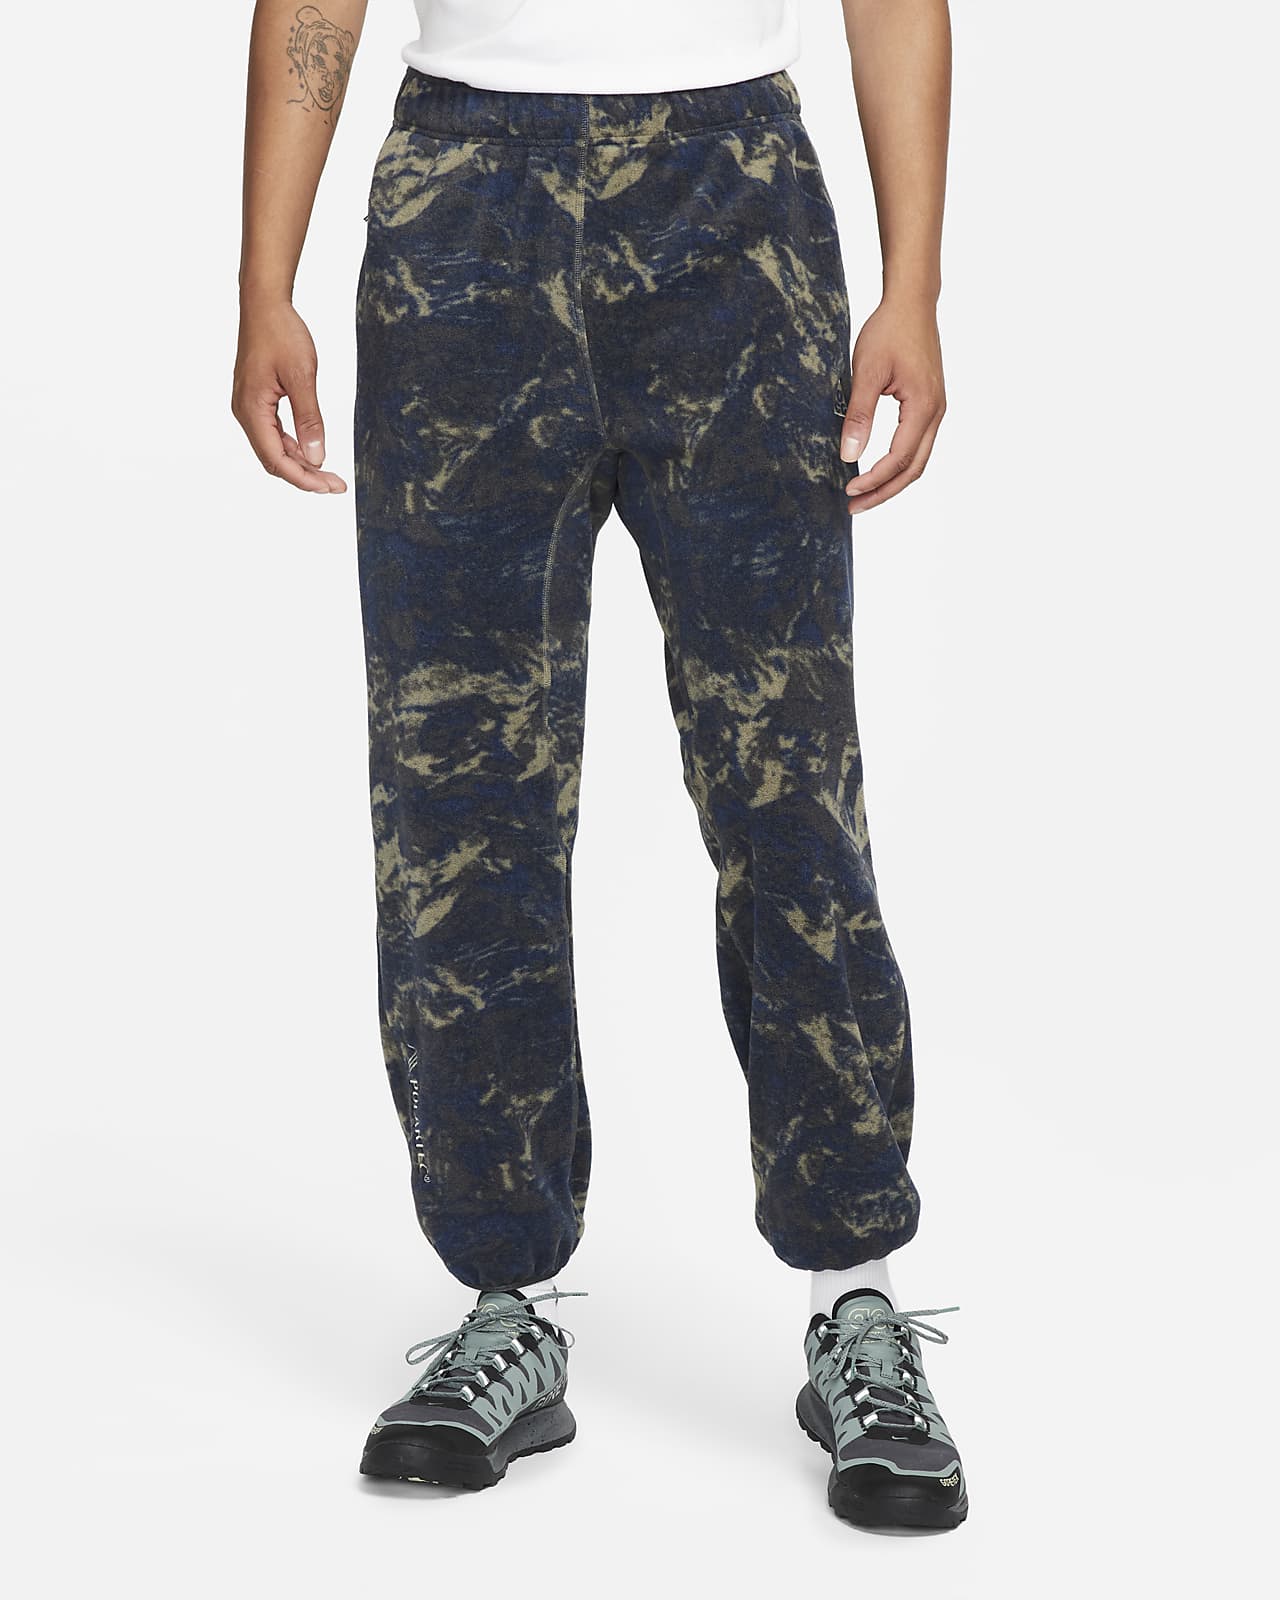 Nike ACG Therma-FIT "Wolf Tree" Men's Allover Print Pants